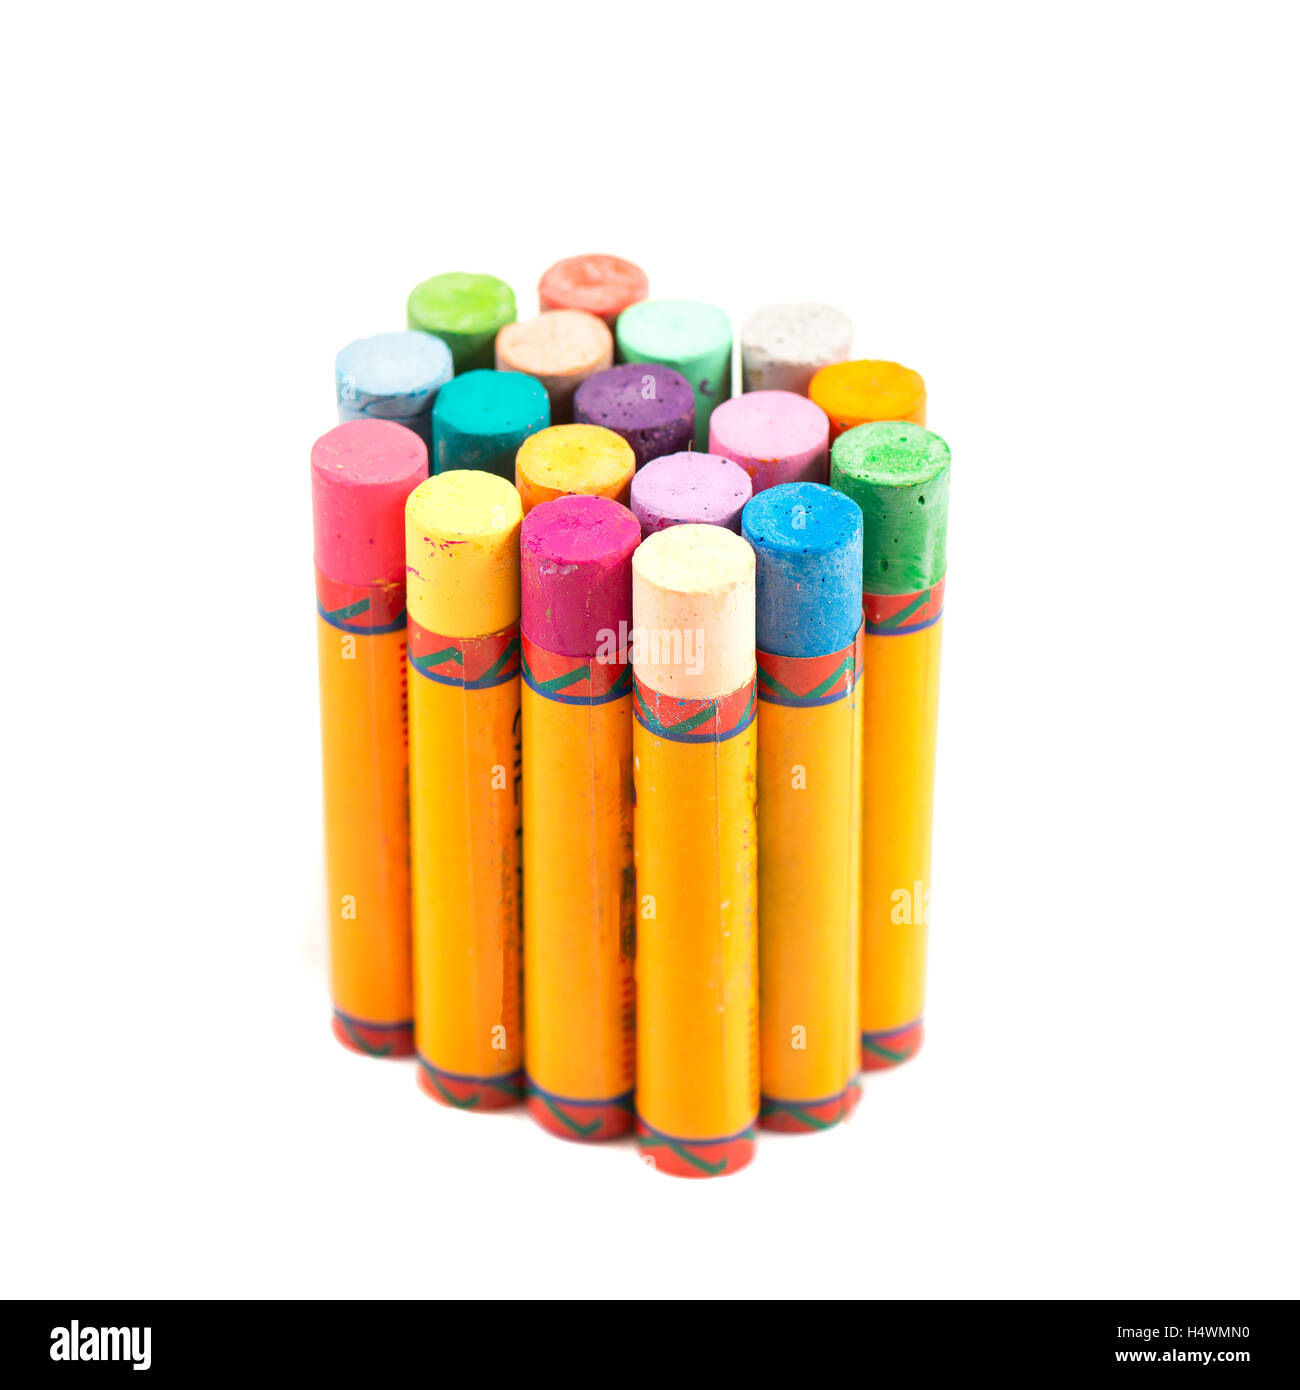 Crayons crayola Cut Out Stock Images & Pictures - Alamy